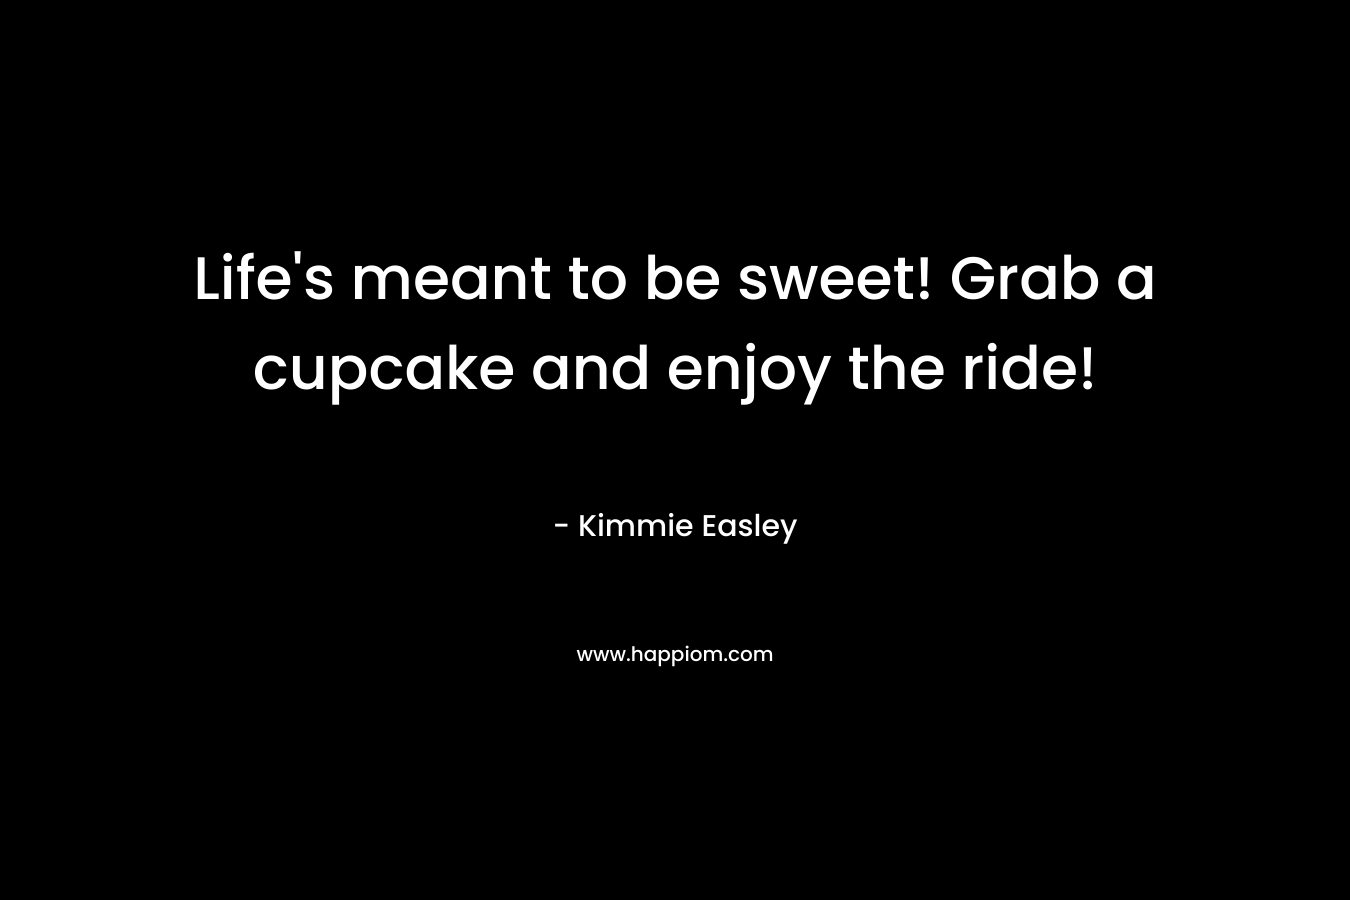 Life’s meant to be sweet! Grab a cupcake and enjoy the ride! – Kimmie Easley